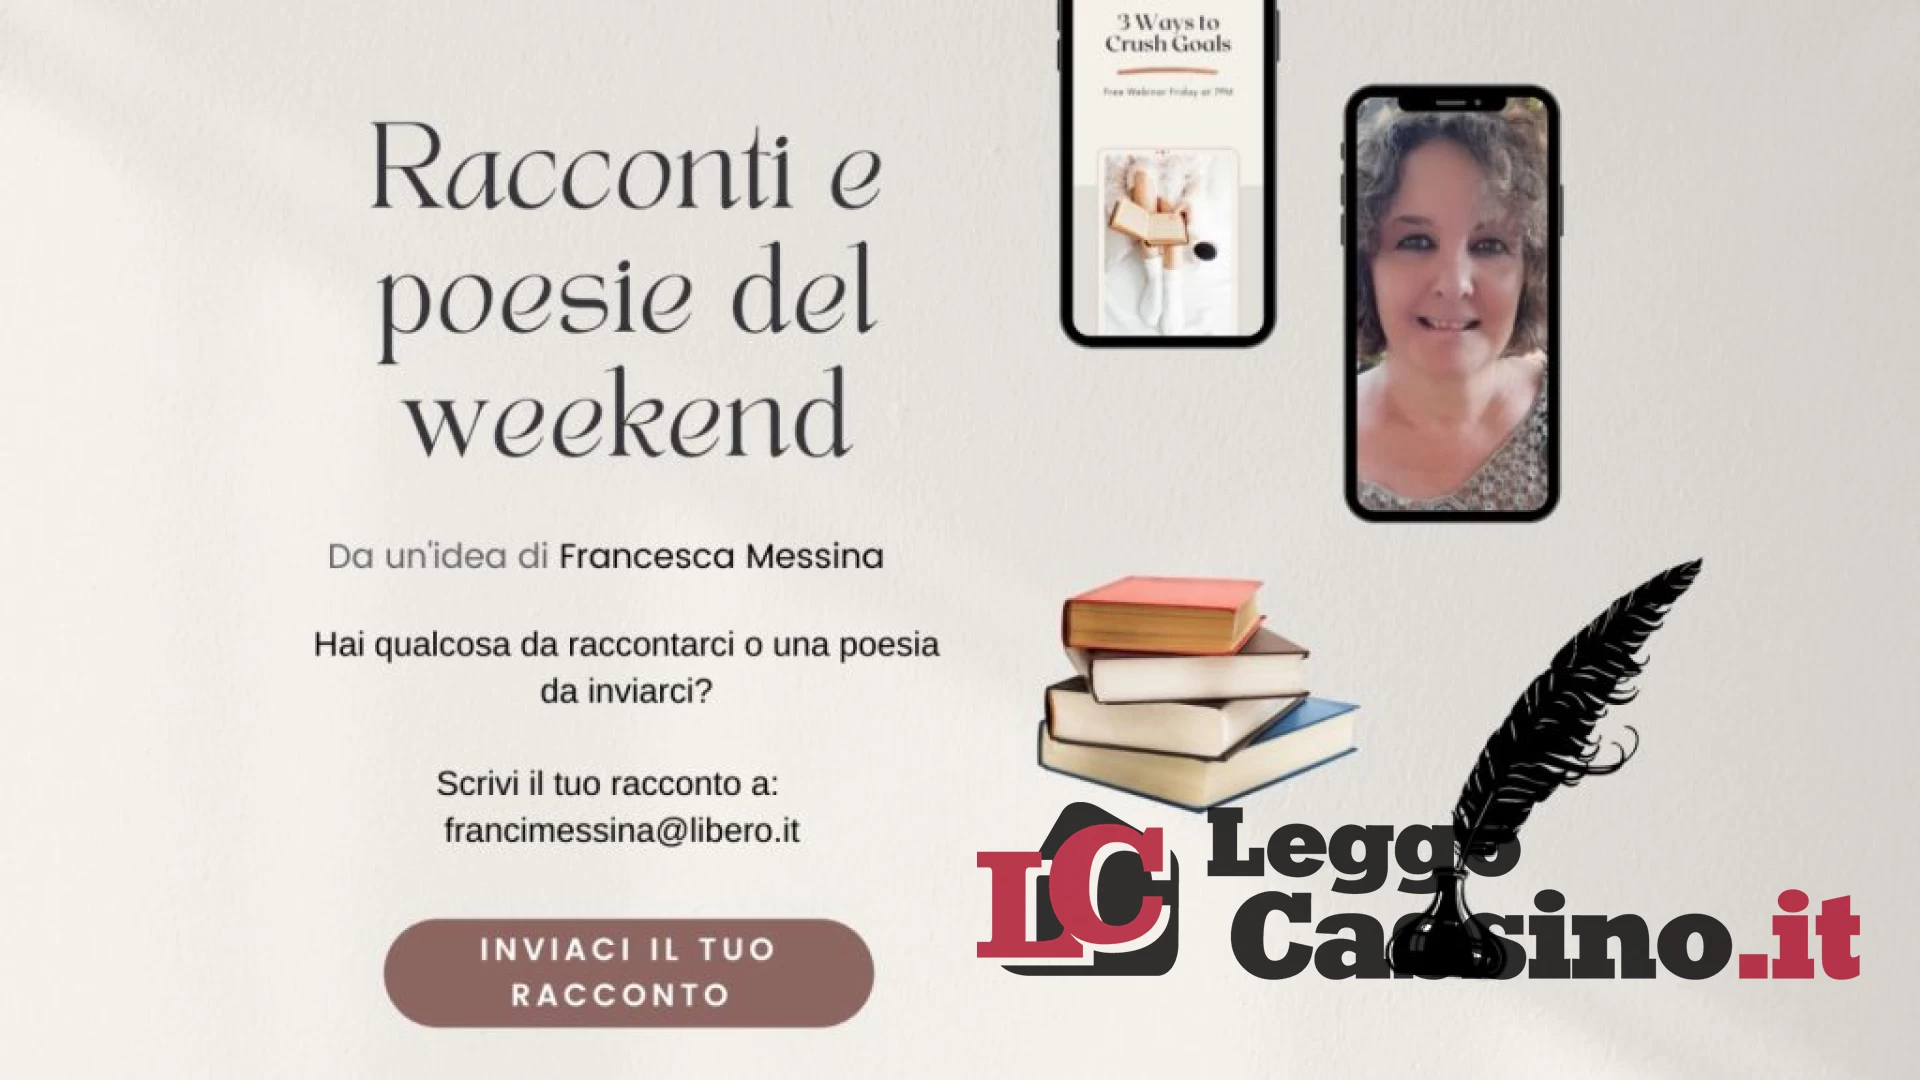 Racconti e Poesie del weekend "Compit'Oscuro"